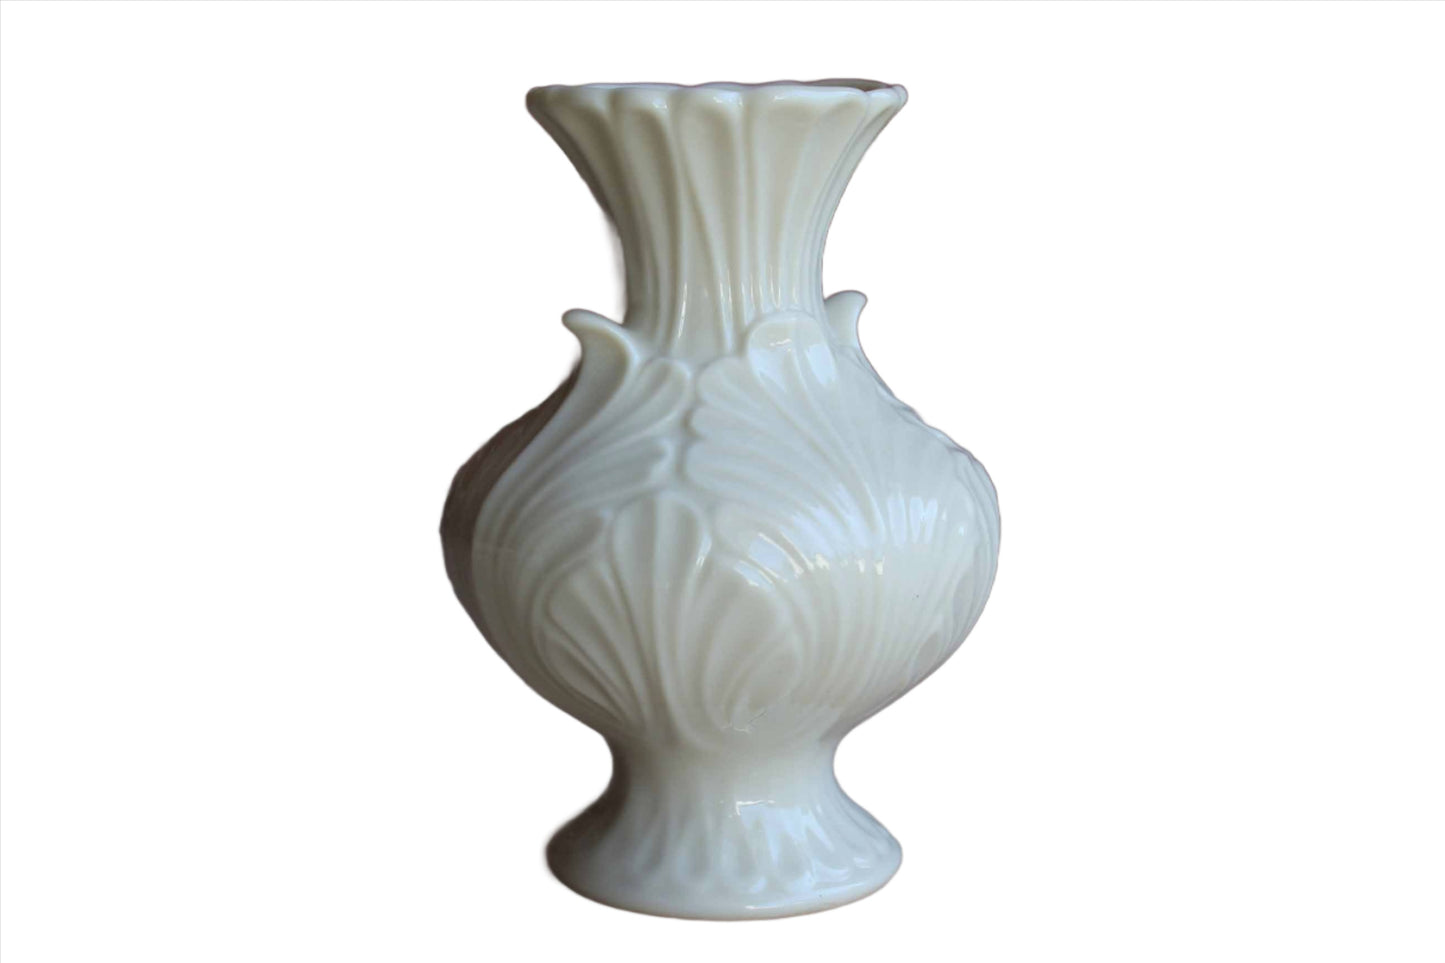 Lenox (USA) Small Porcelain Bud Vase with Embossed Floral Pattern